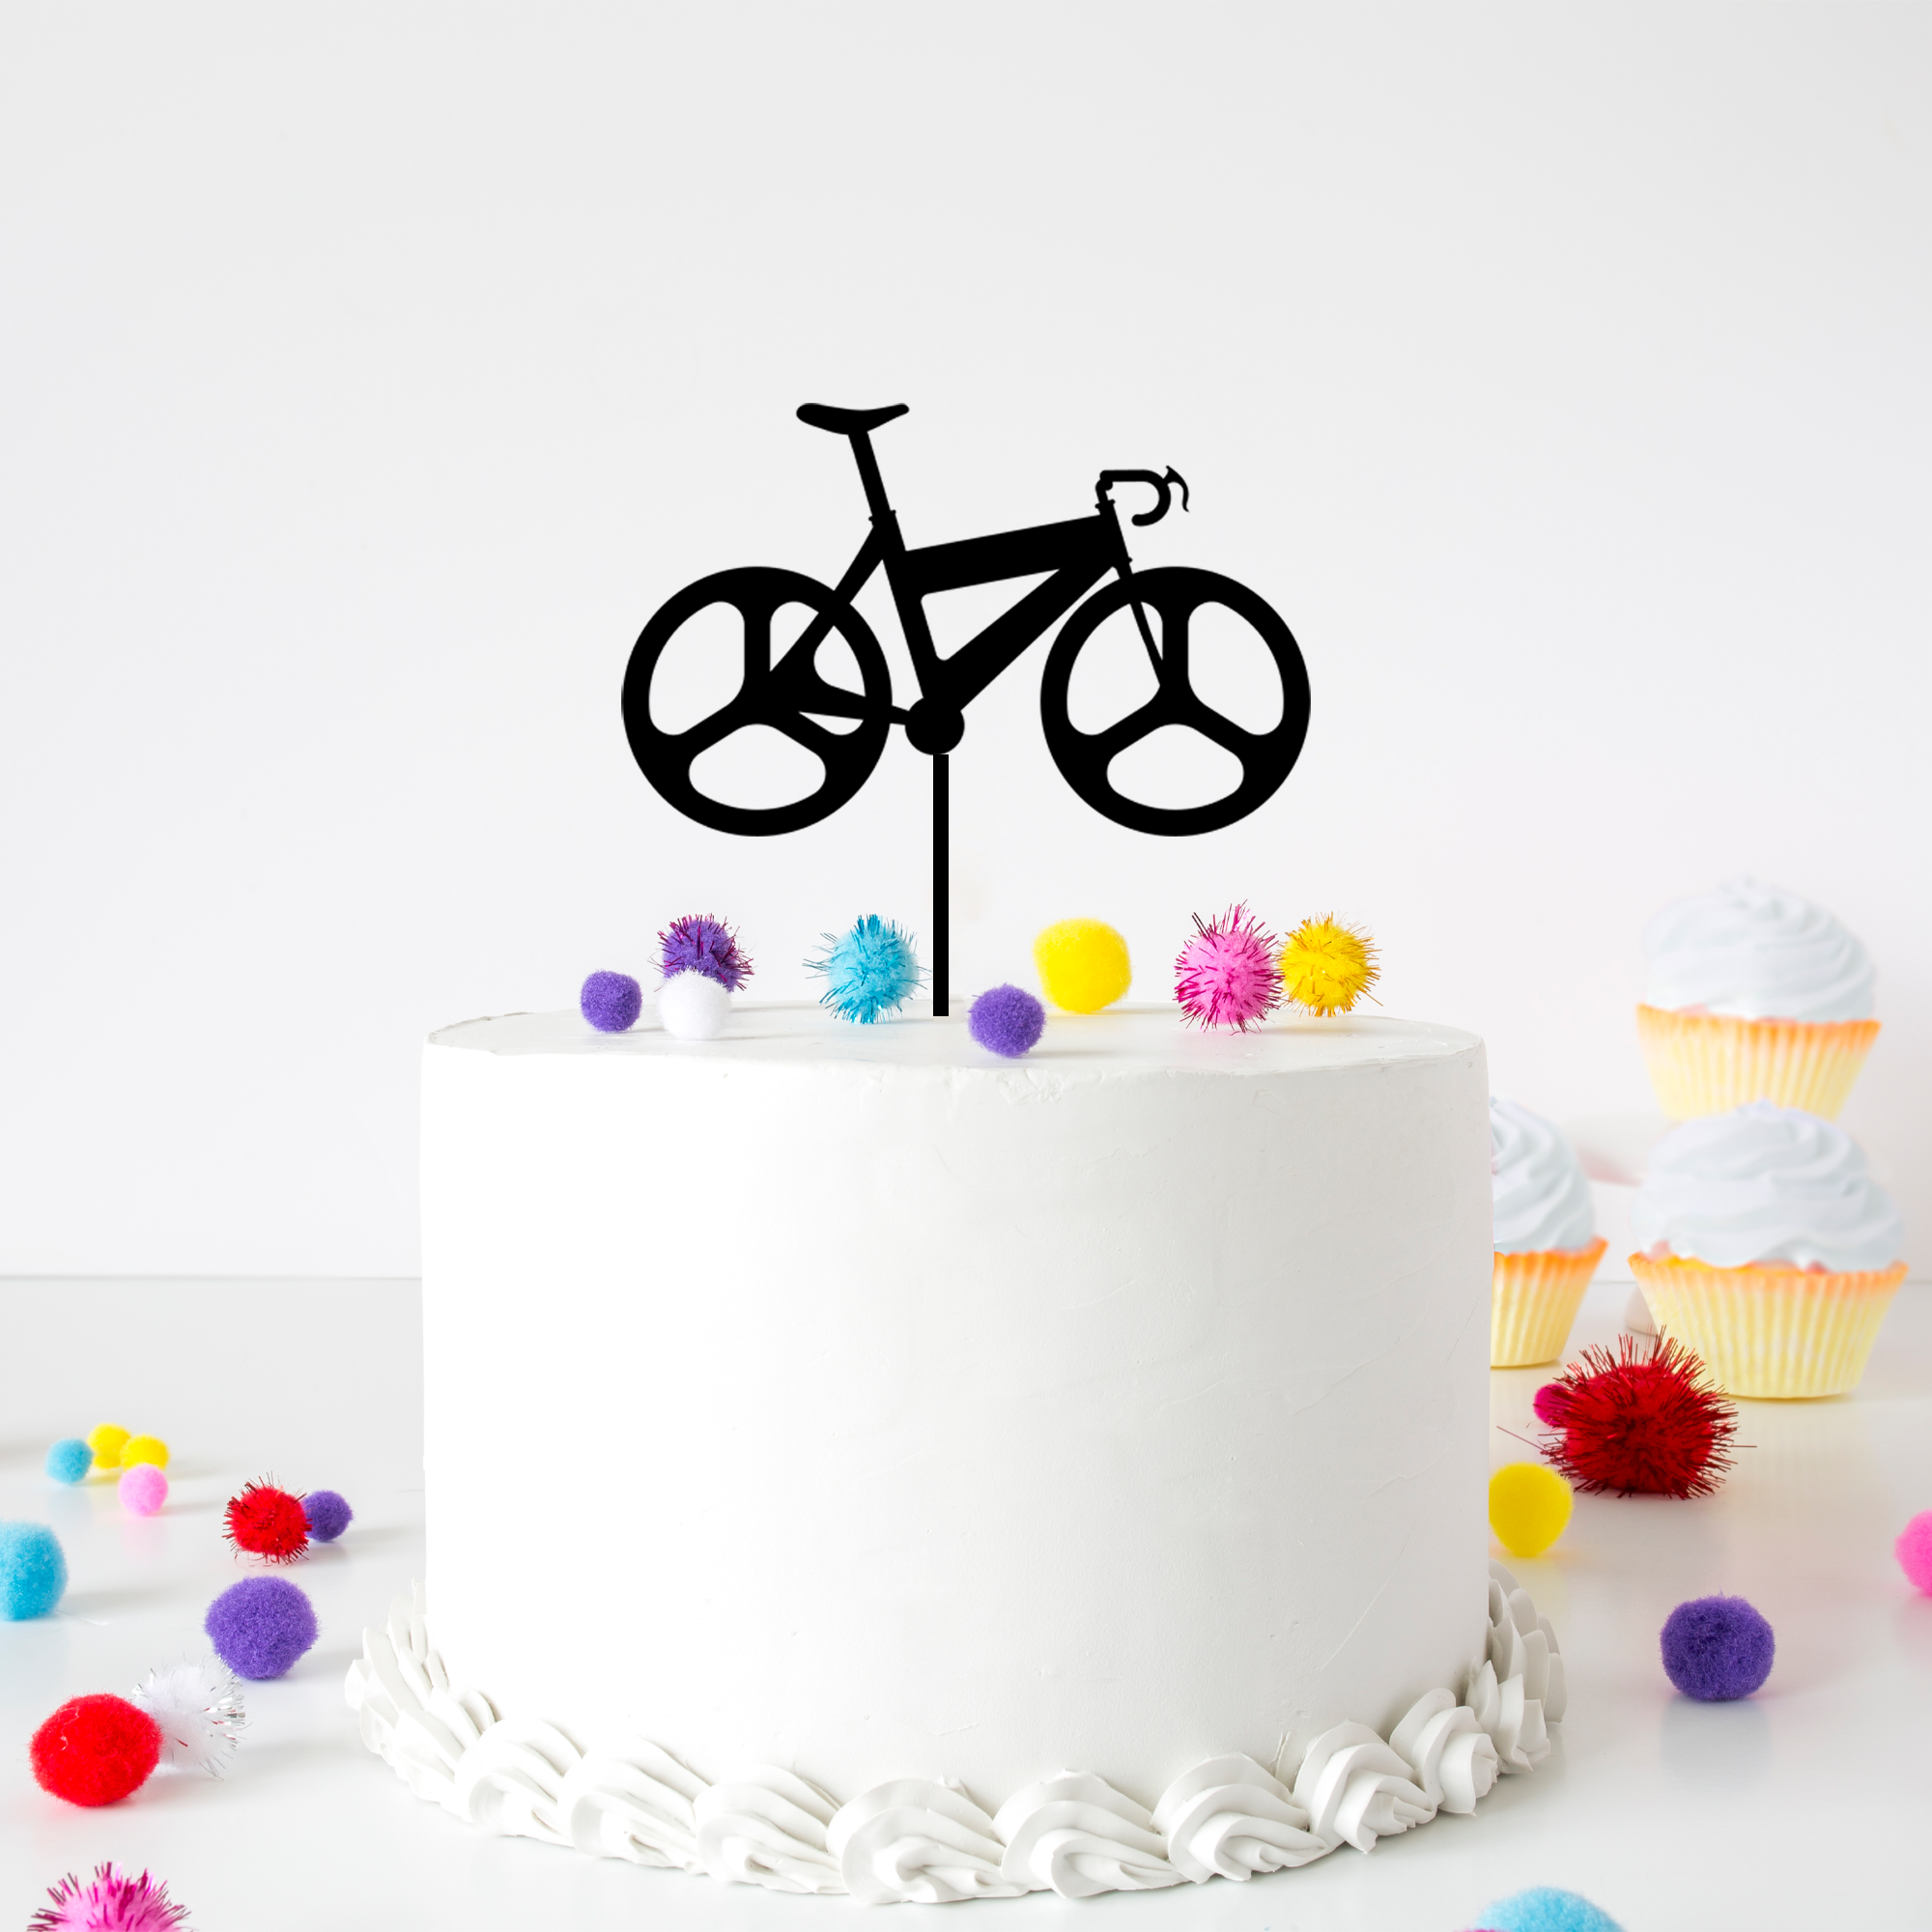 Cycling cake | Cakes in Dubai | Cakes for Guys | Best Cake